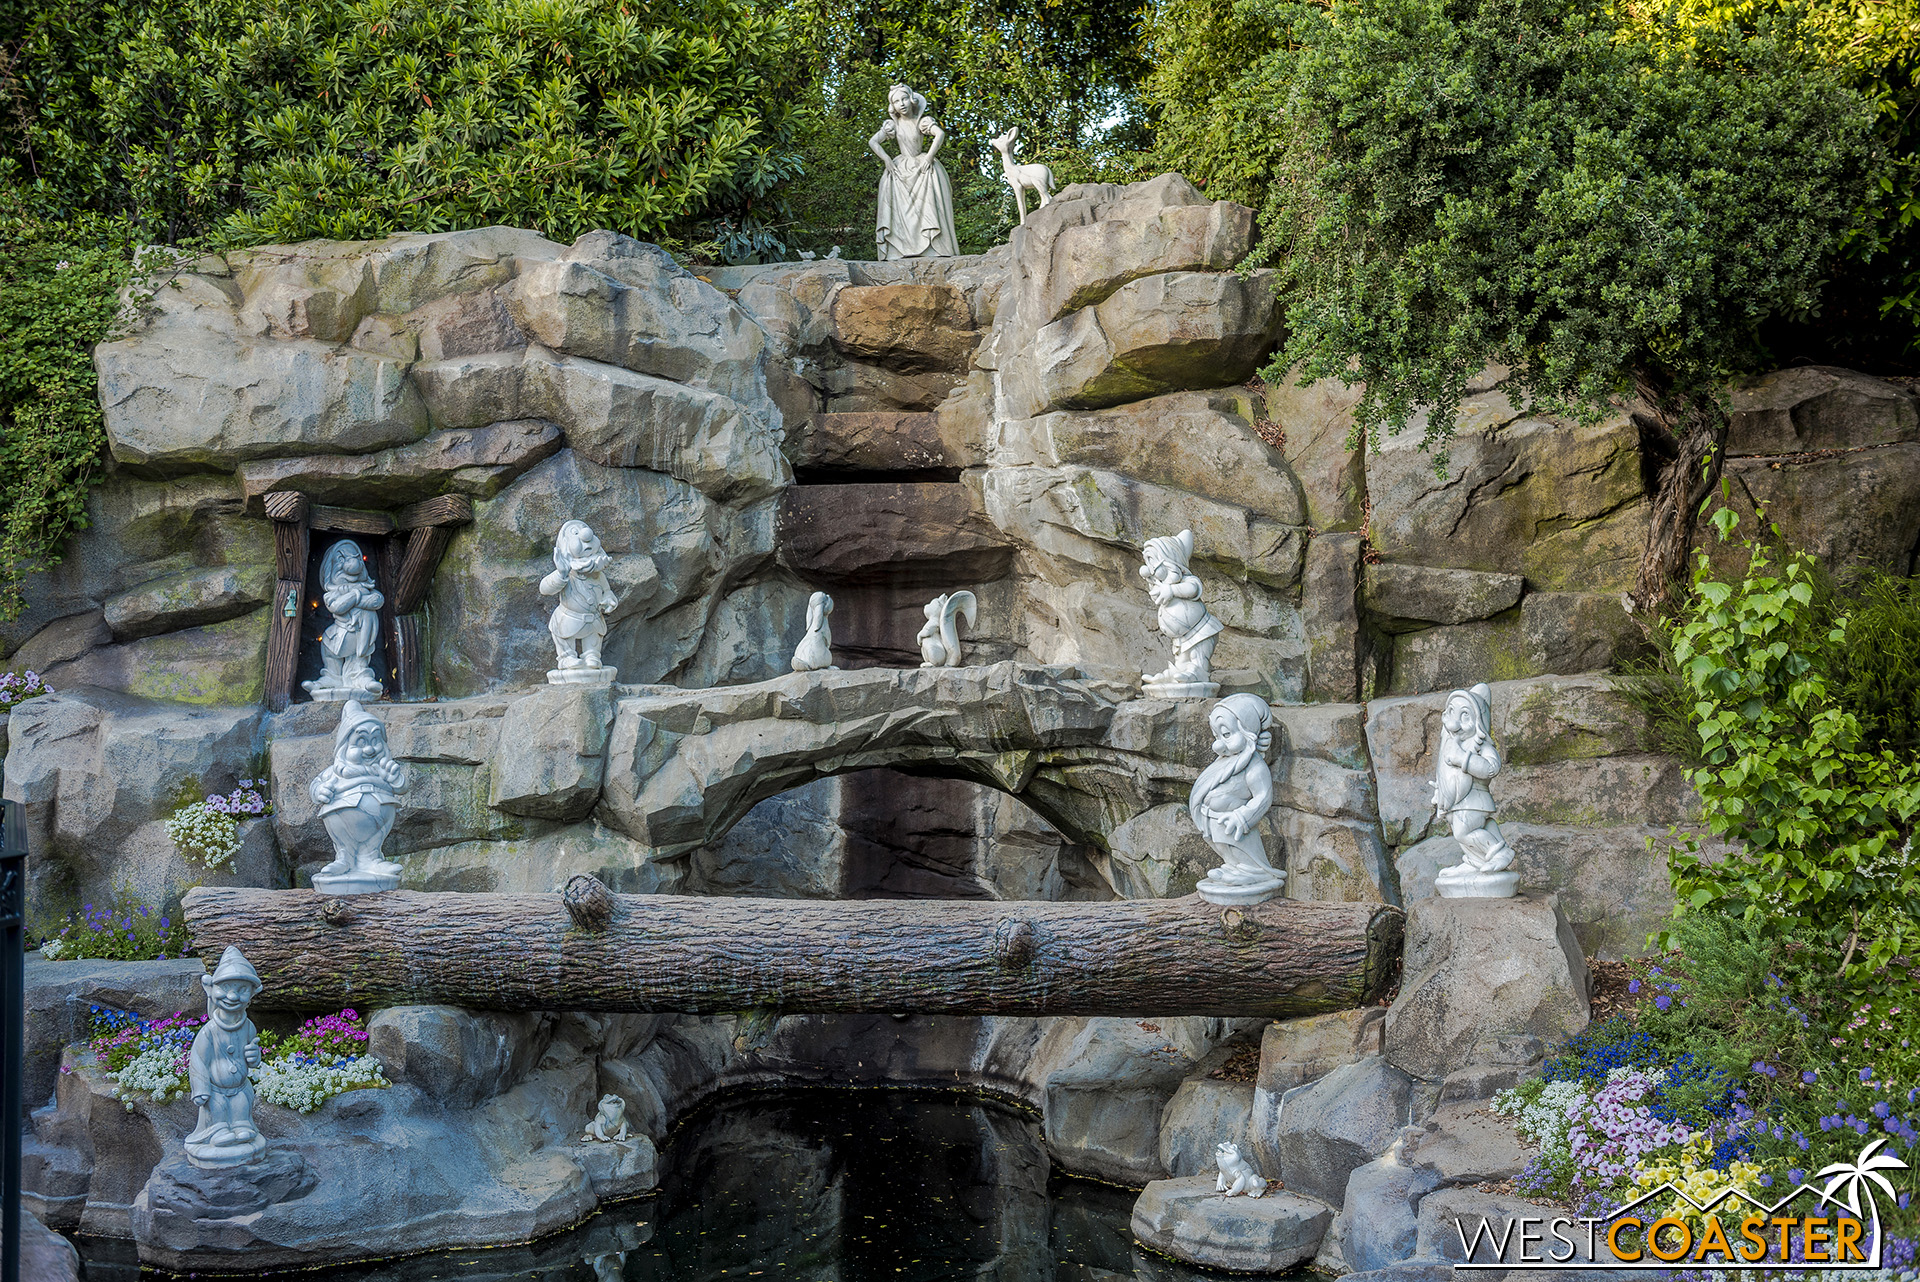  The Wishing Well is back open as well. 